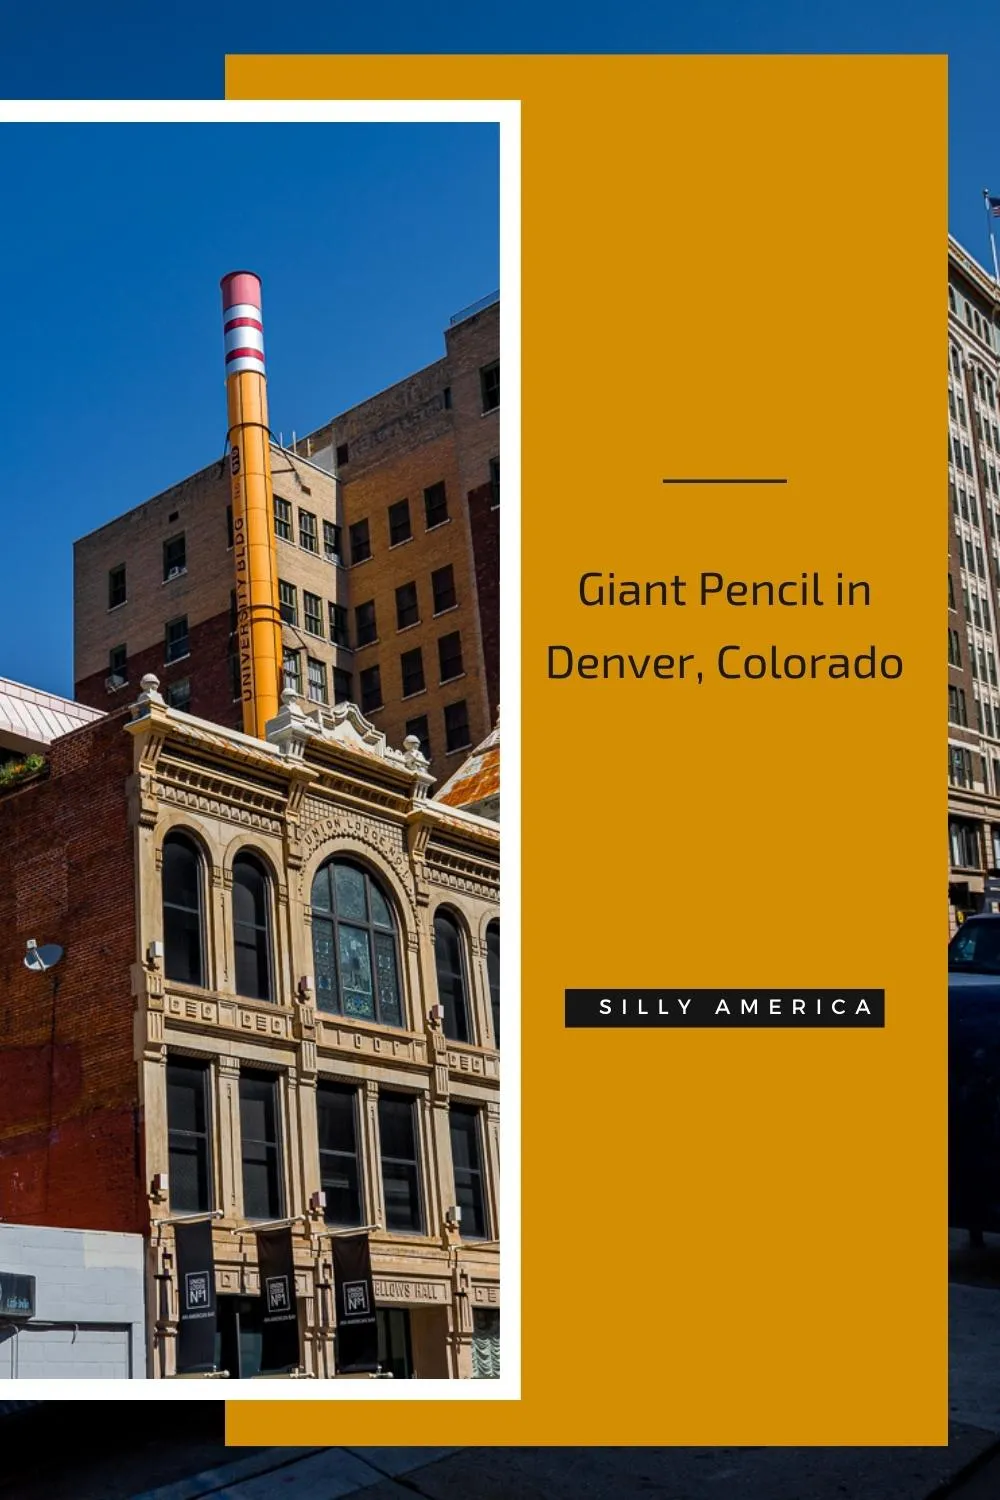 Visiting Denver? Don't erase Colorado this roadside attraction from your itinerary. The Giant Pencil in Denver, Colorado is definitely a big draw! This 15-story tall pencil is actually a smokestack. Visit this Denver roadside attraction on your Colorado road trip or vacation! #RoadsideAttraction #RoadsideAttractions #DenverRoadsideAttraction #ColoradoRoadsideAttraction #RoadTrip #RoadTripStop #DenverRoadTrip #ColoradoRoadTrip